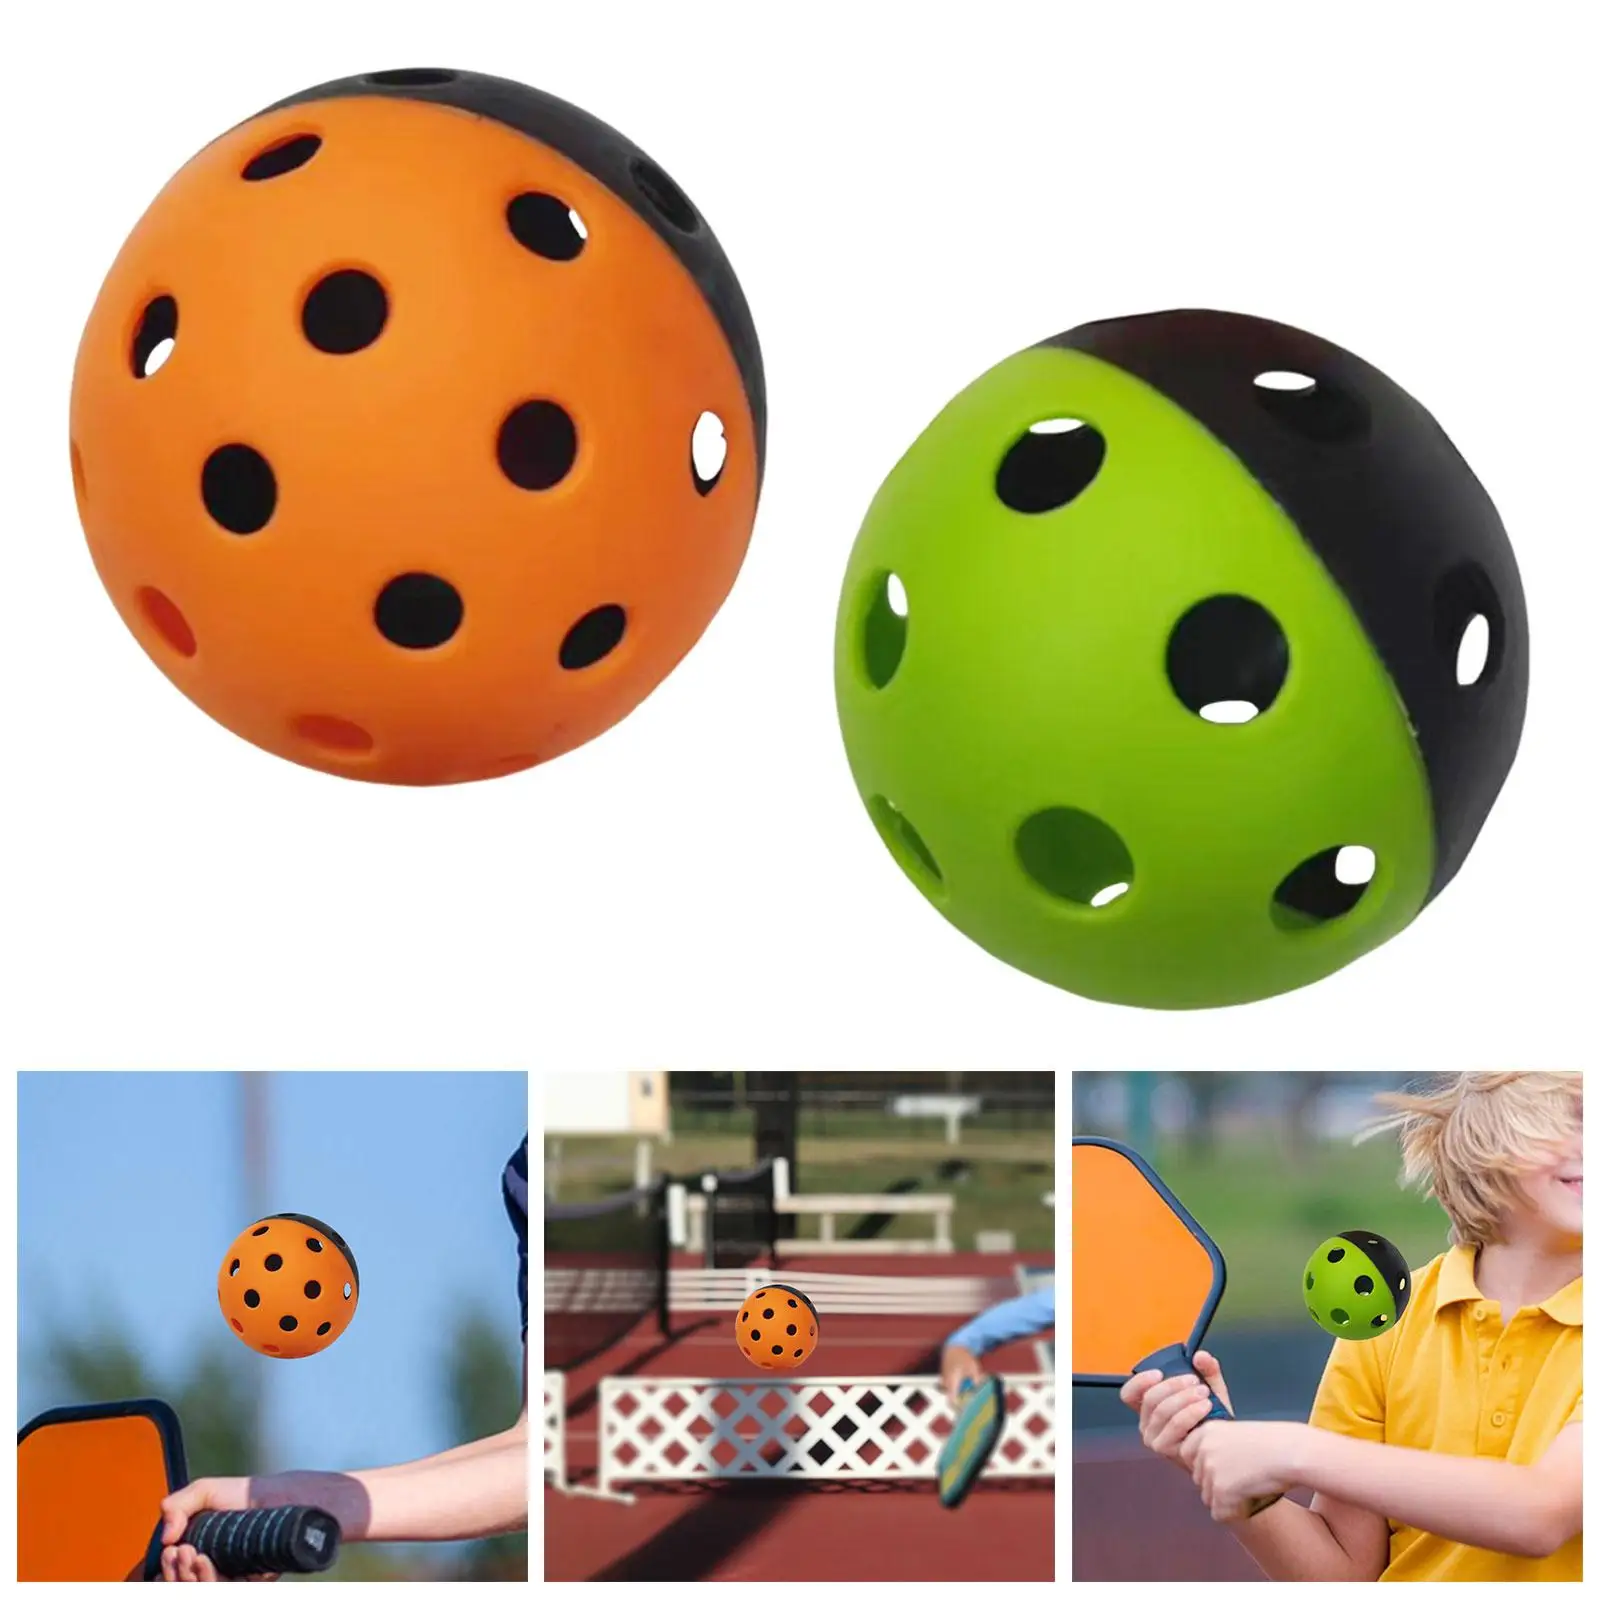 Pickleball Ball High Elastic 26 Holes Standard Golf Hollow Ball Pickle Balls for Outdoor Indoor Training Tournament Play Adult